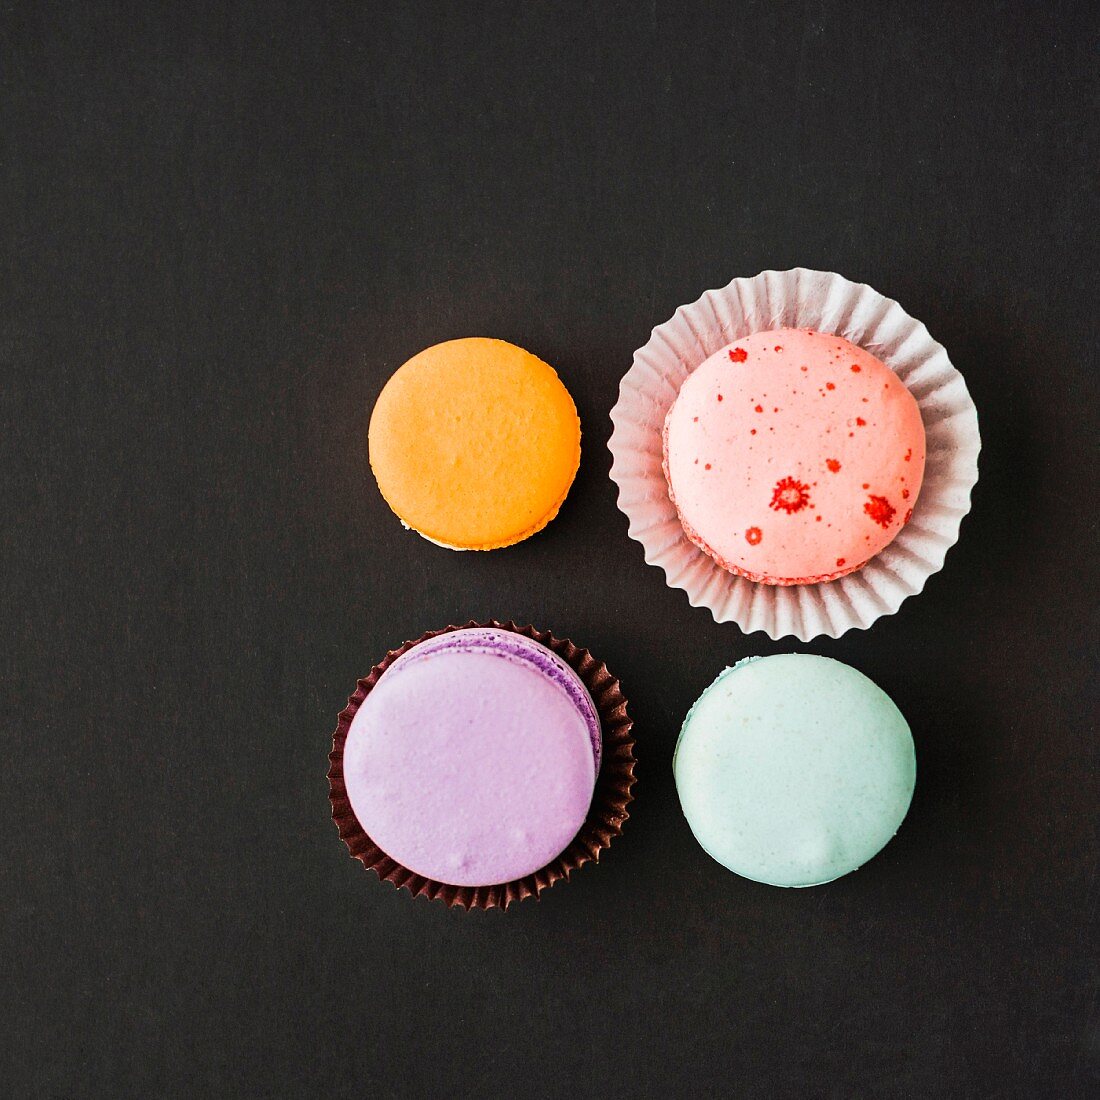 Four macaroons on a black background